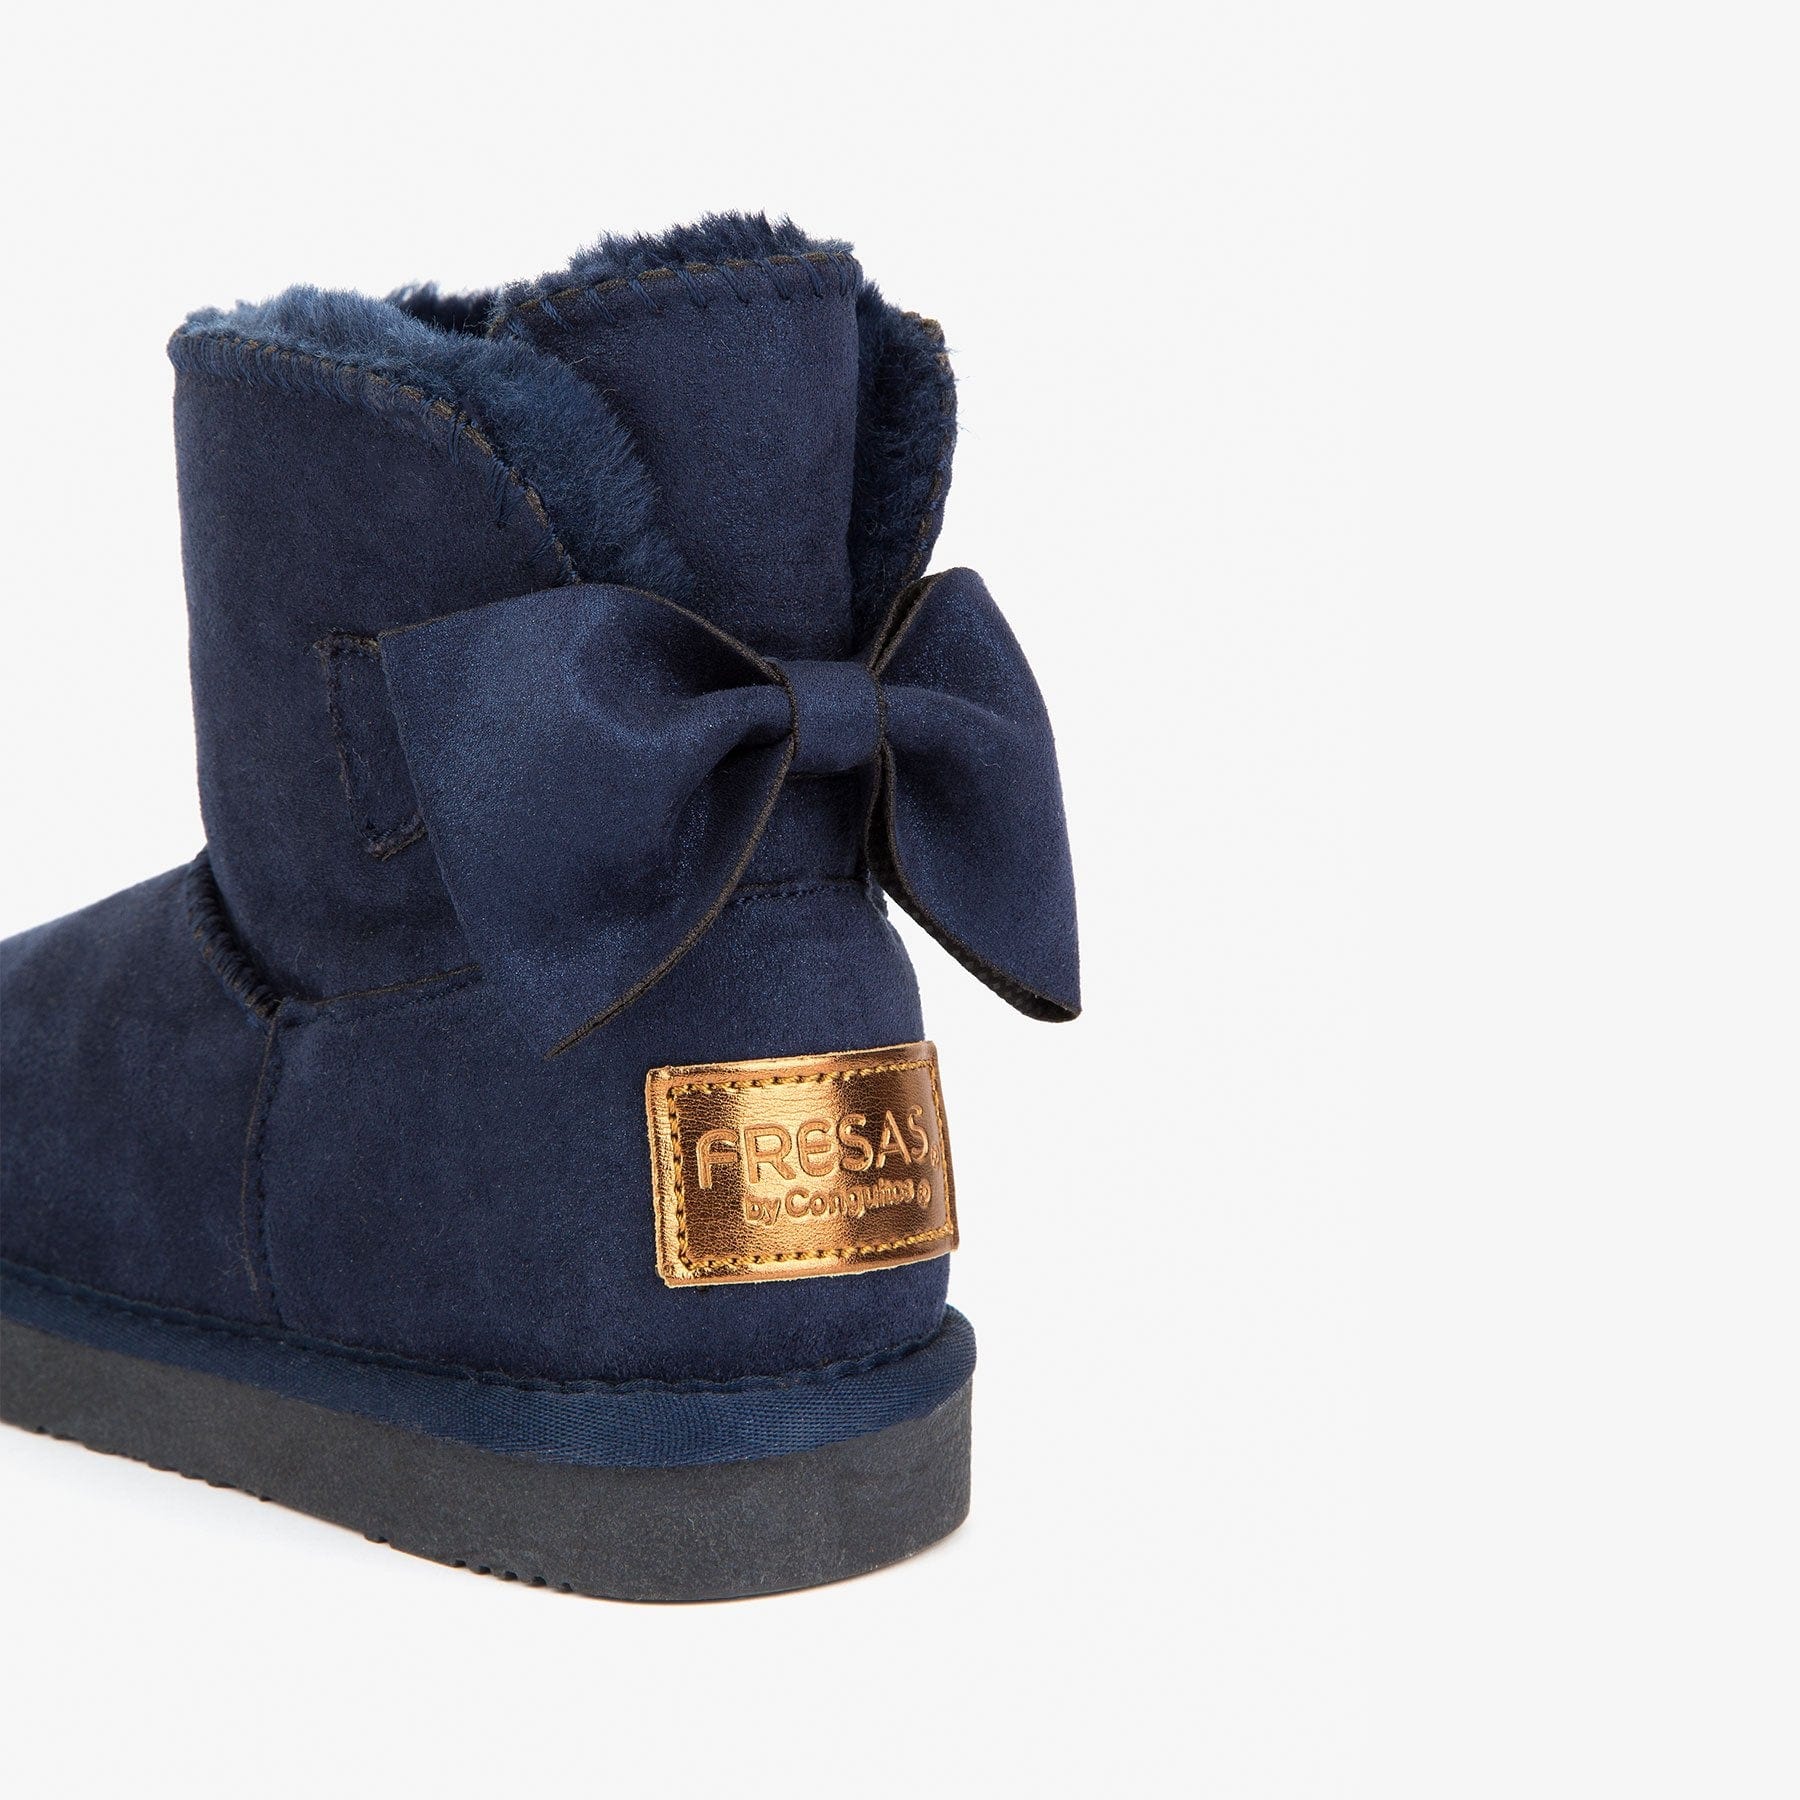 FRESAS CON NATA Shoes Girl's Navy Australian Boots with Bow